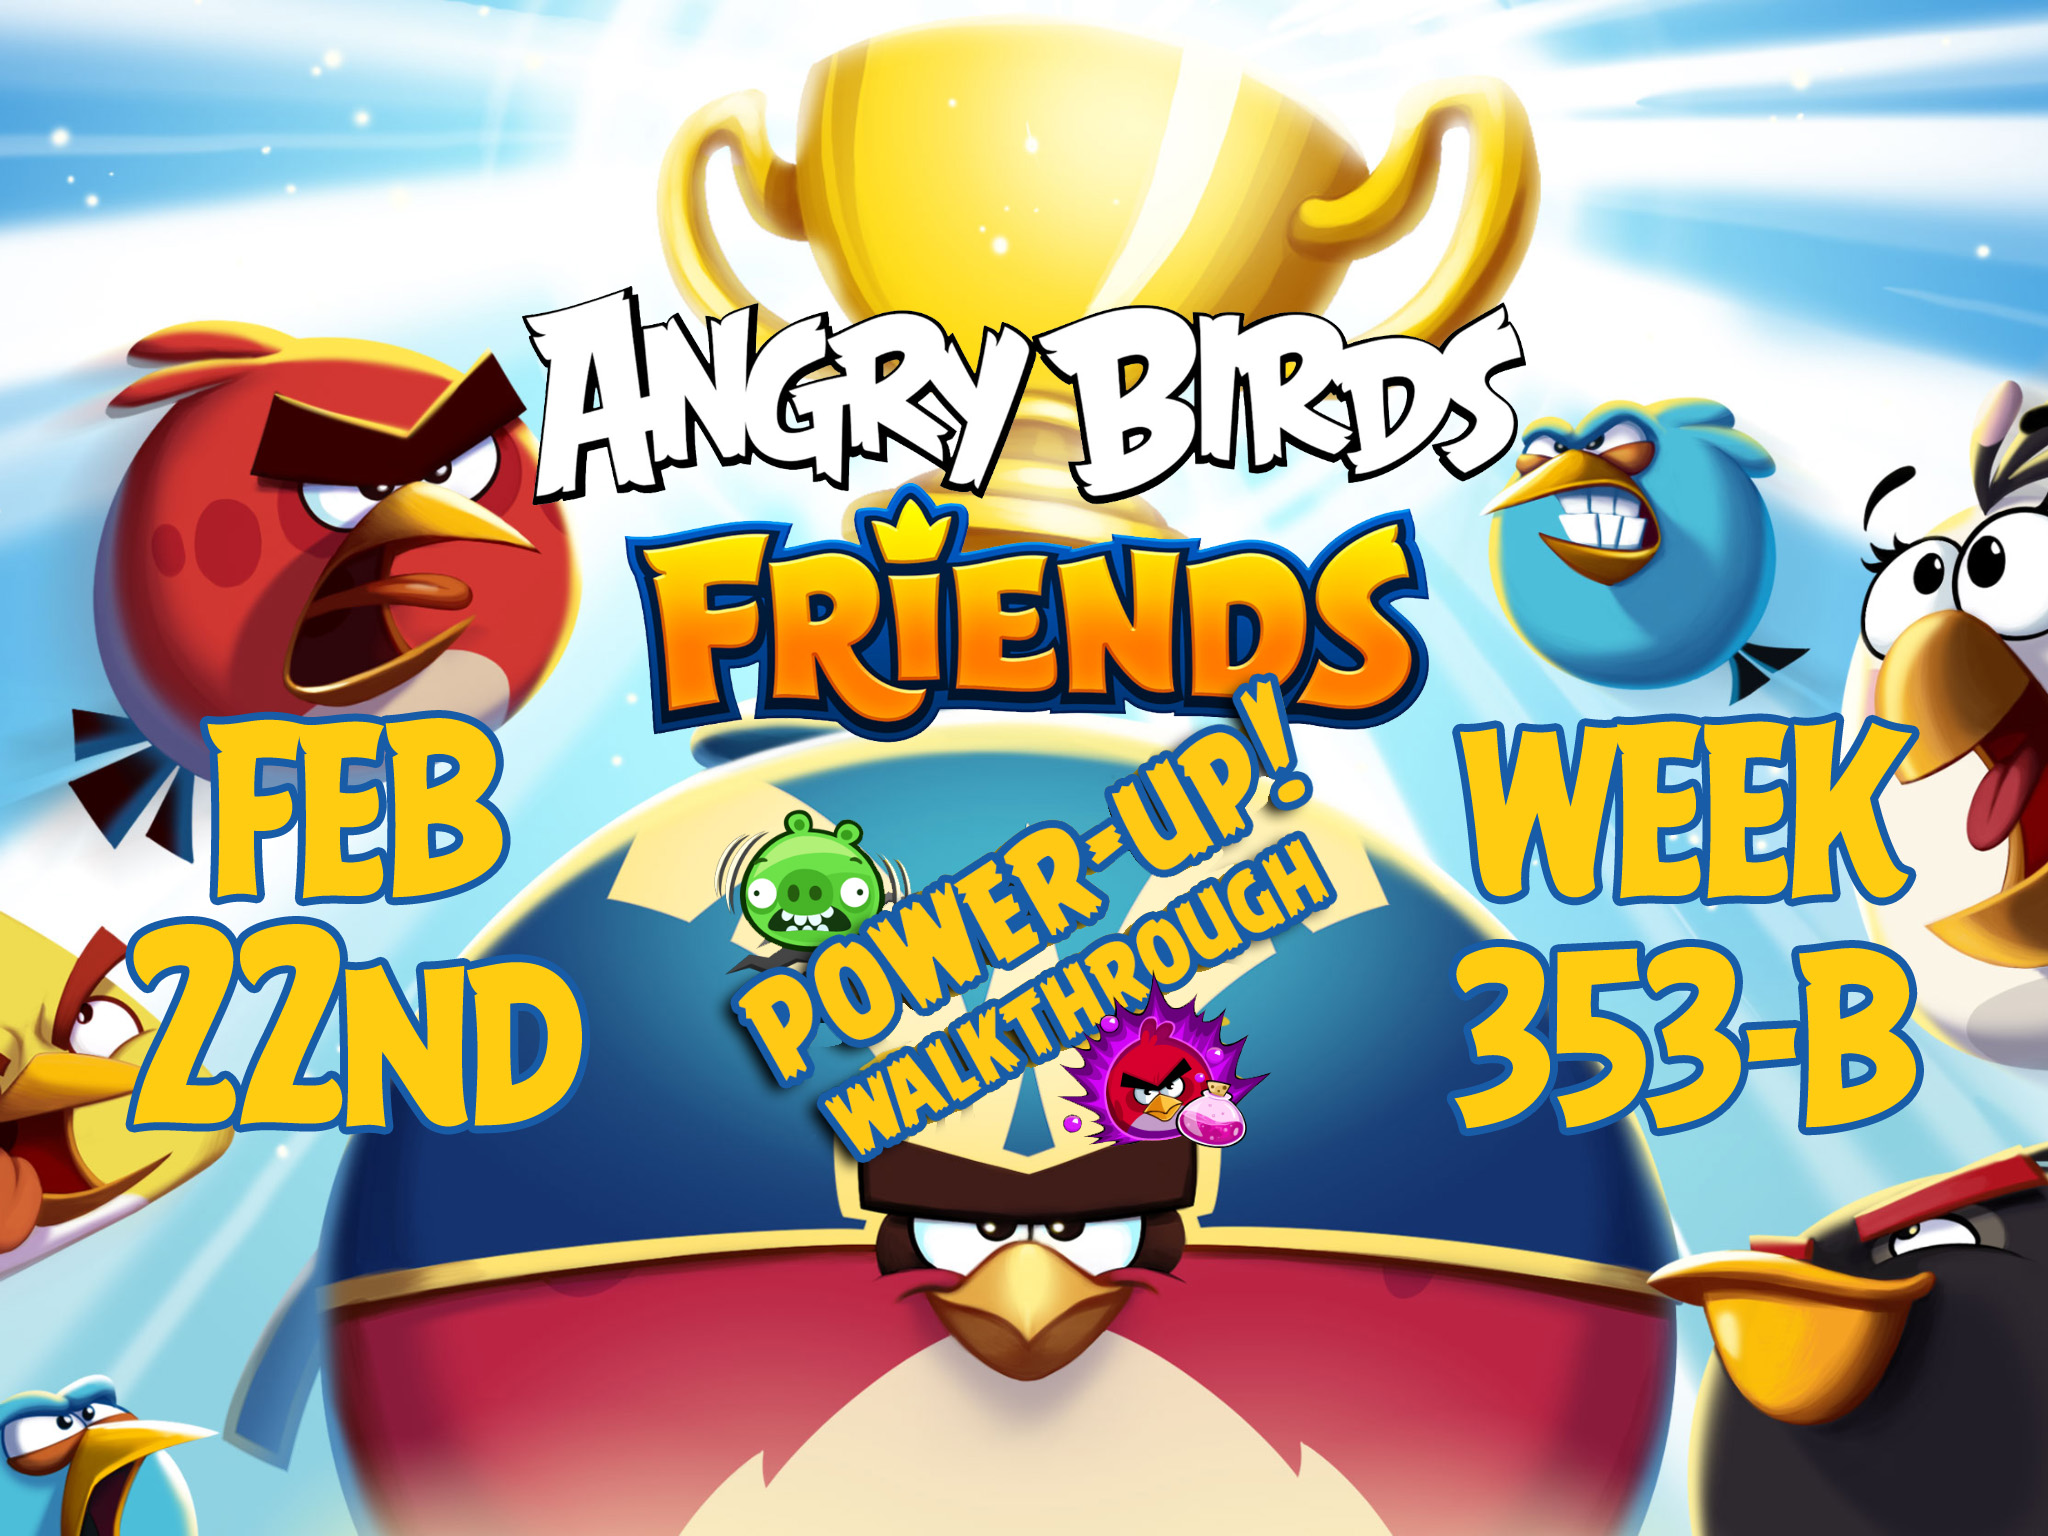 Angry-Birds-Friends-Tournament-Week-353-B-Feature-Image-PU